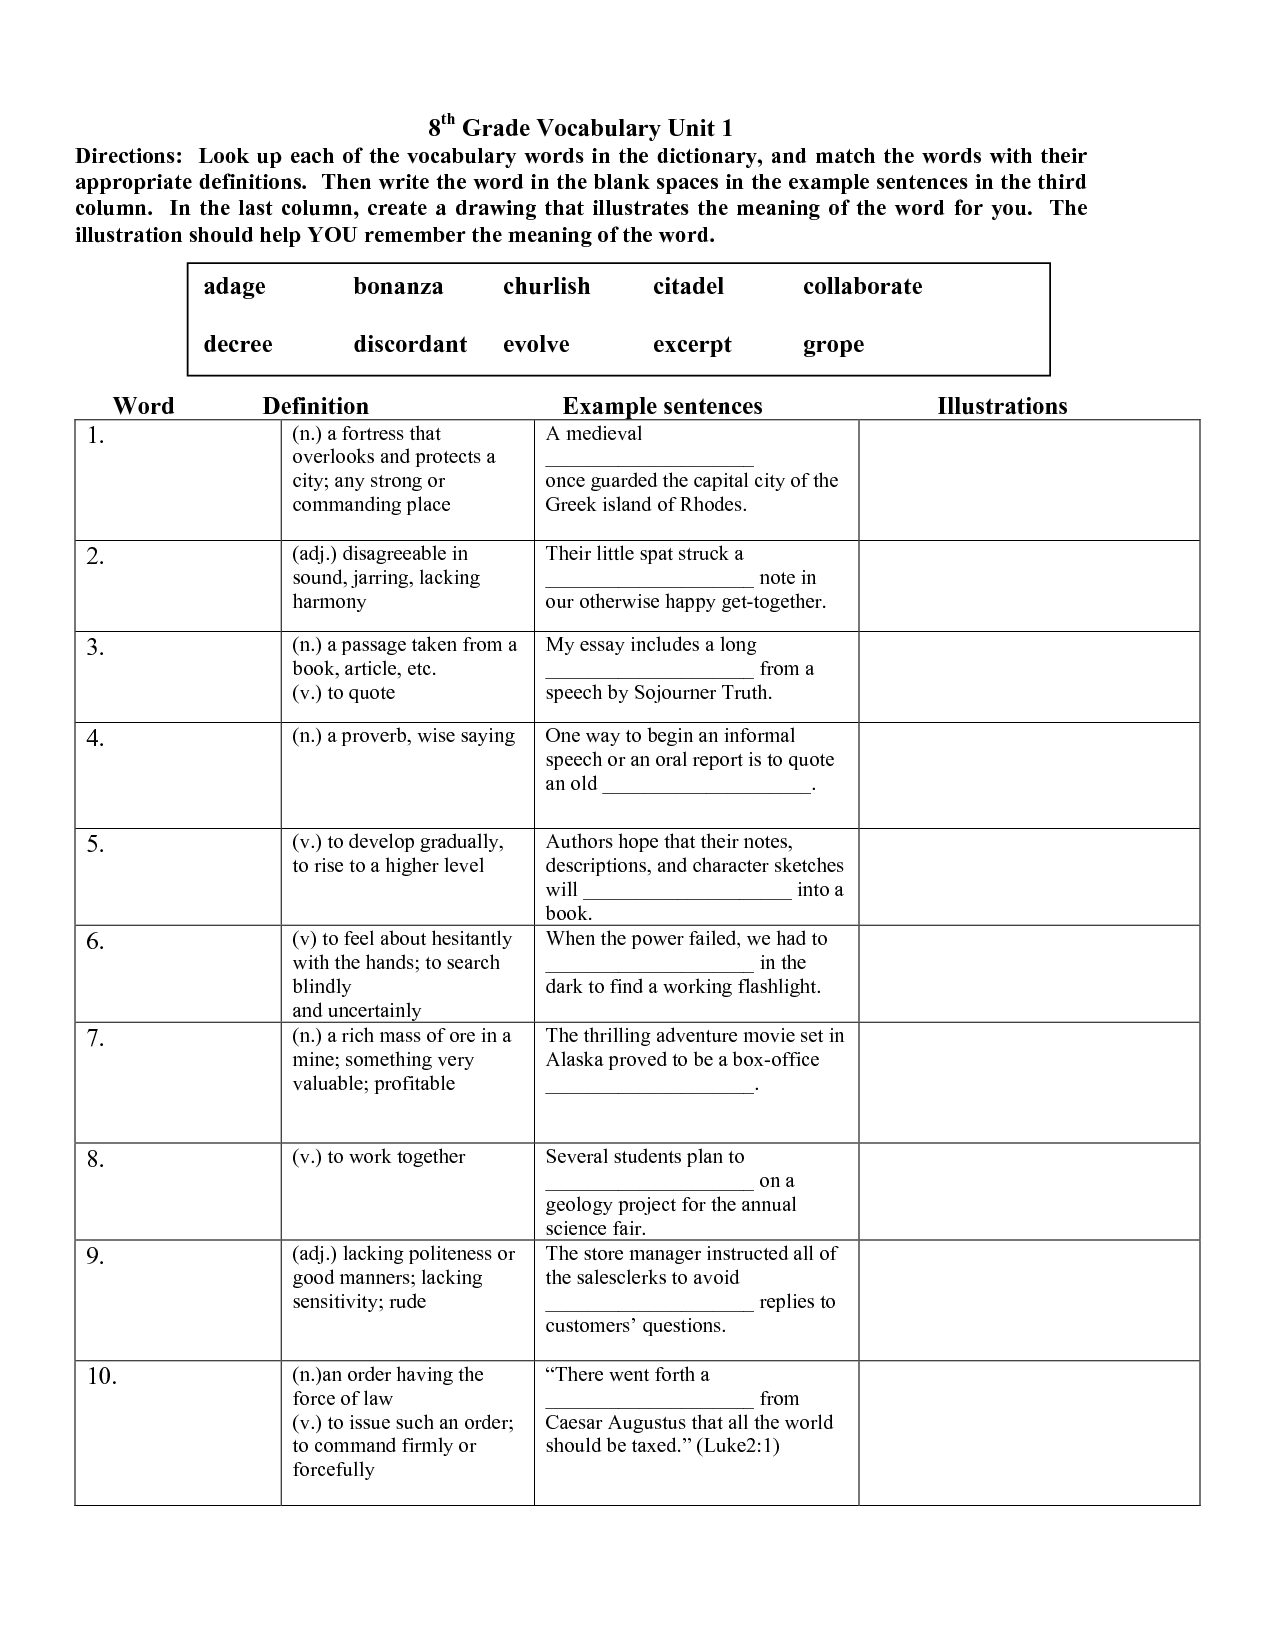 8th Grade Vocabulary Words And Definitions Worksheets